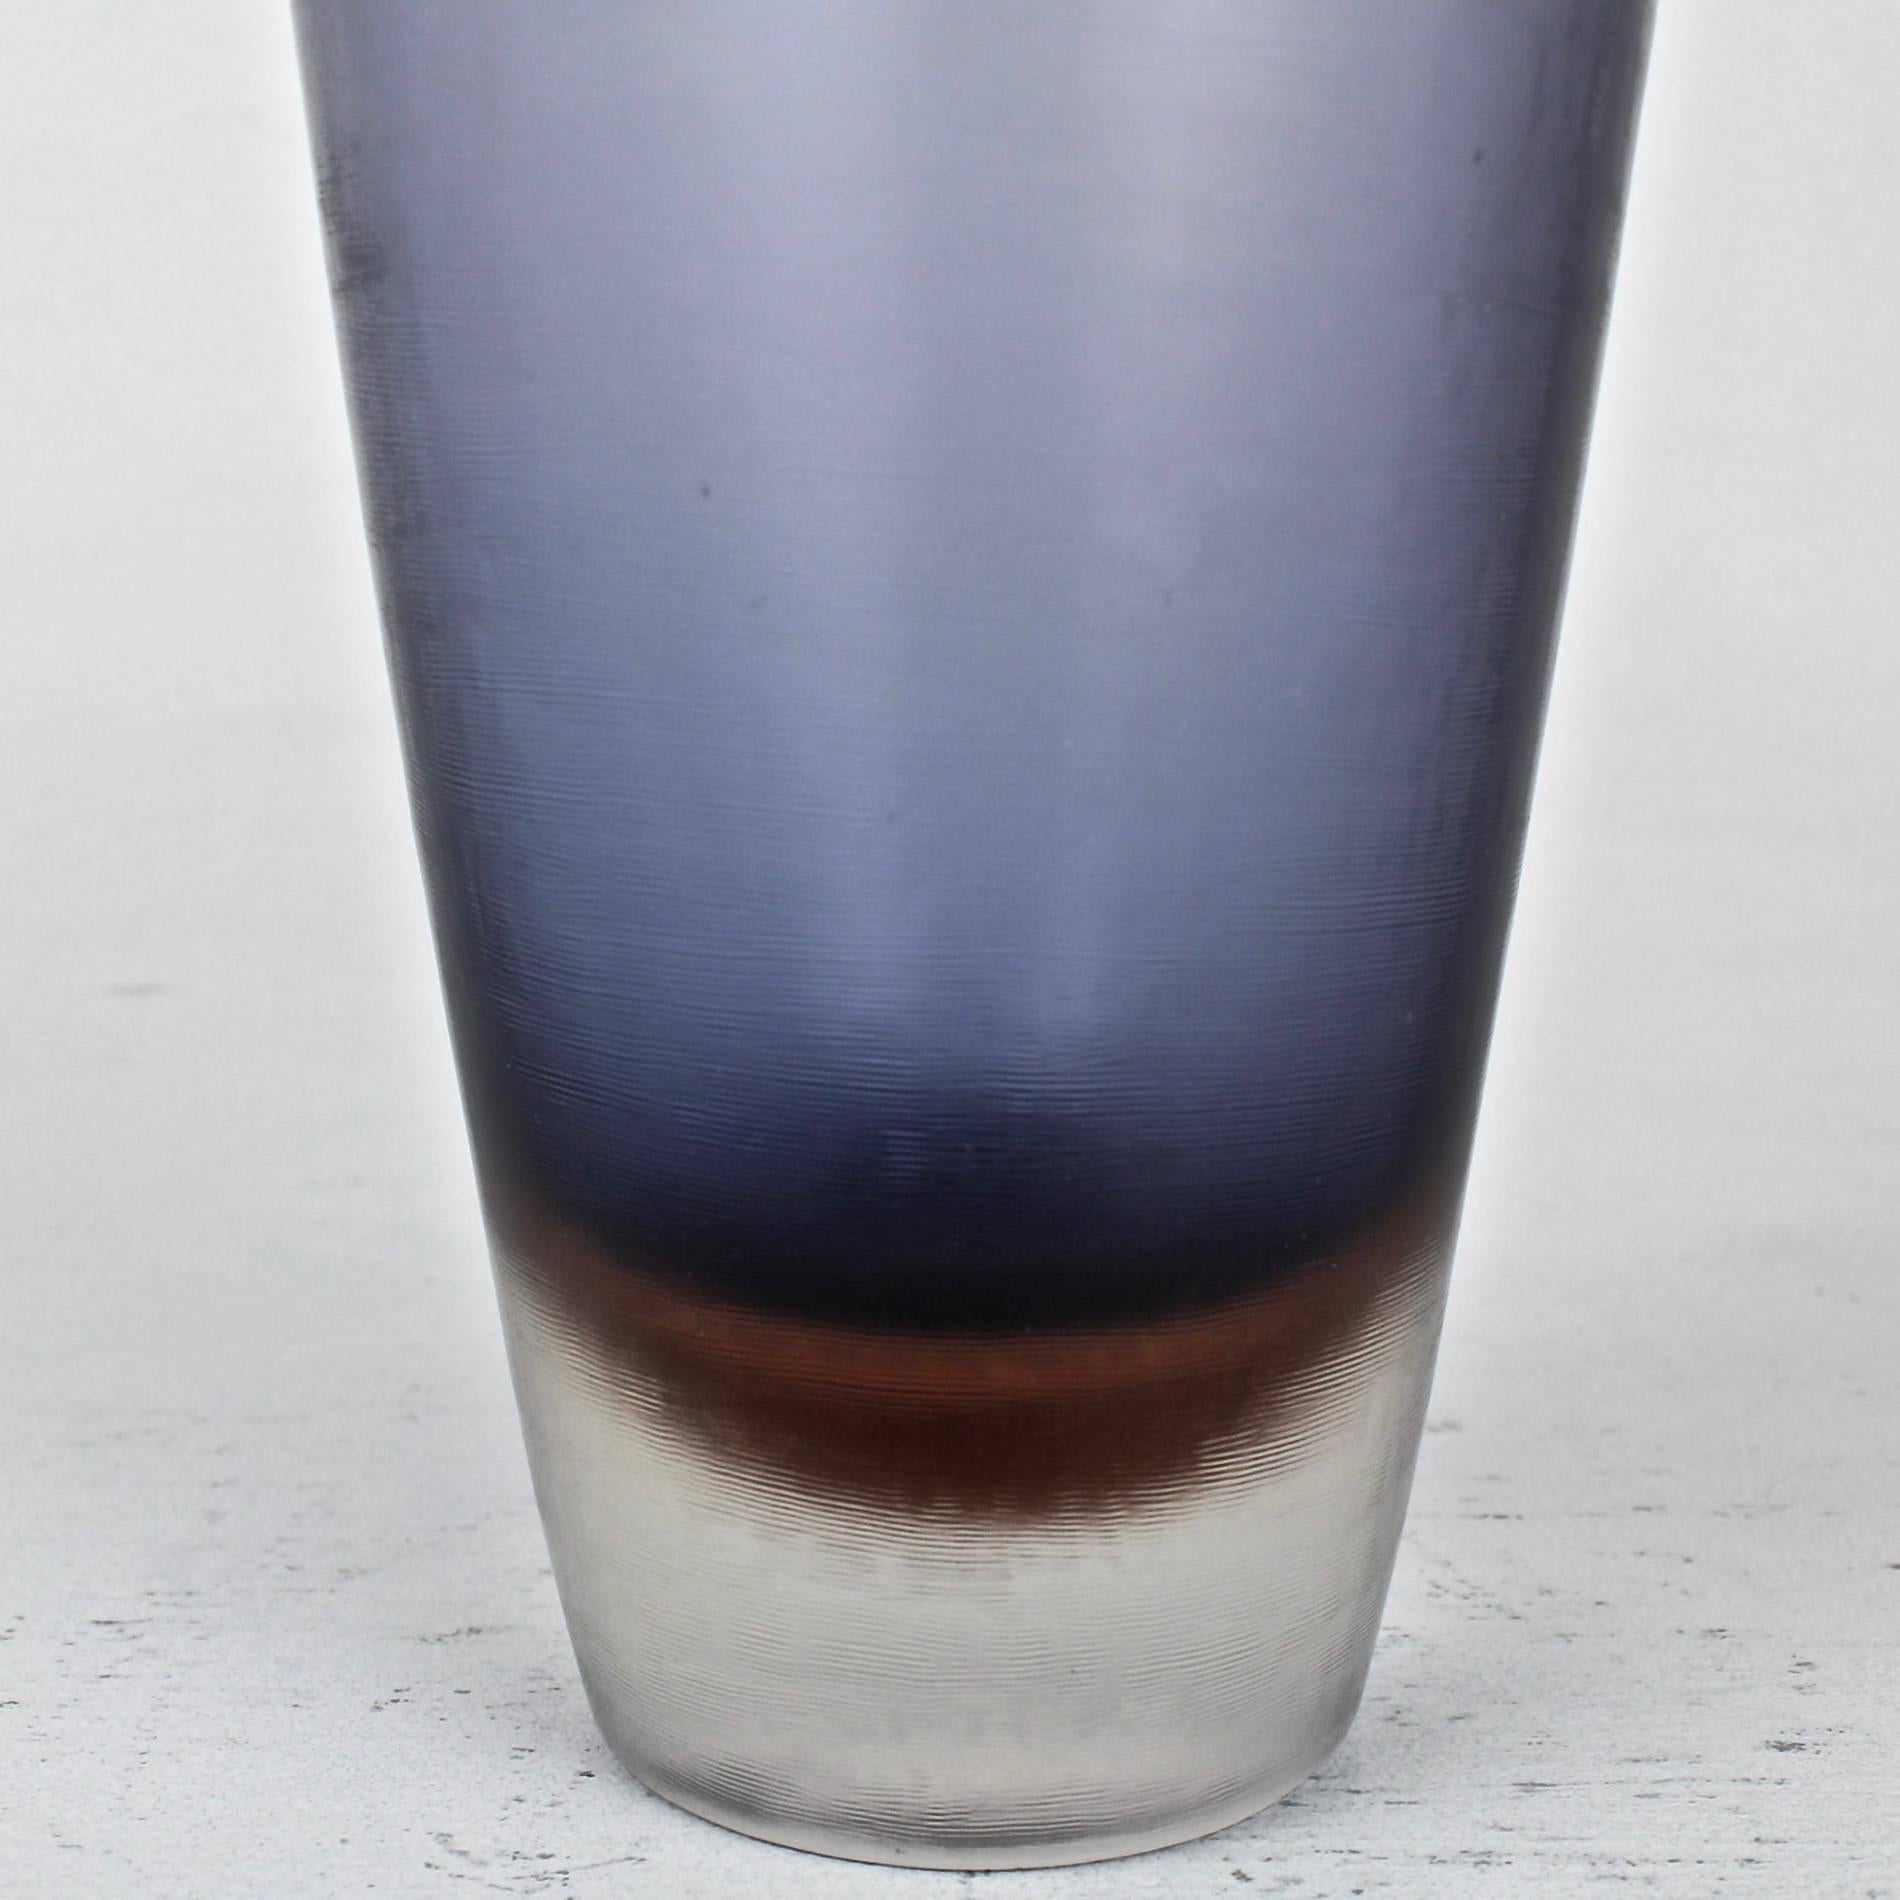 Paolo Venini designed "Inciso" glass vase with blue and brown colors under clear glass.

Base bears the three-line acid etched mark: "Venini Murano Italia".

Height: circa 8 1/4 in.

Items purchased from David Sterner